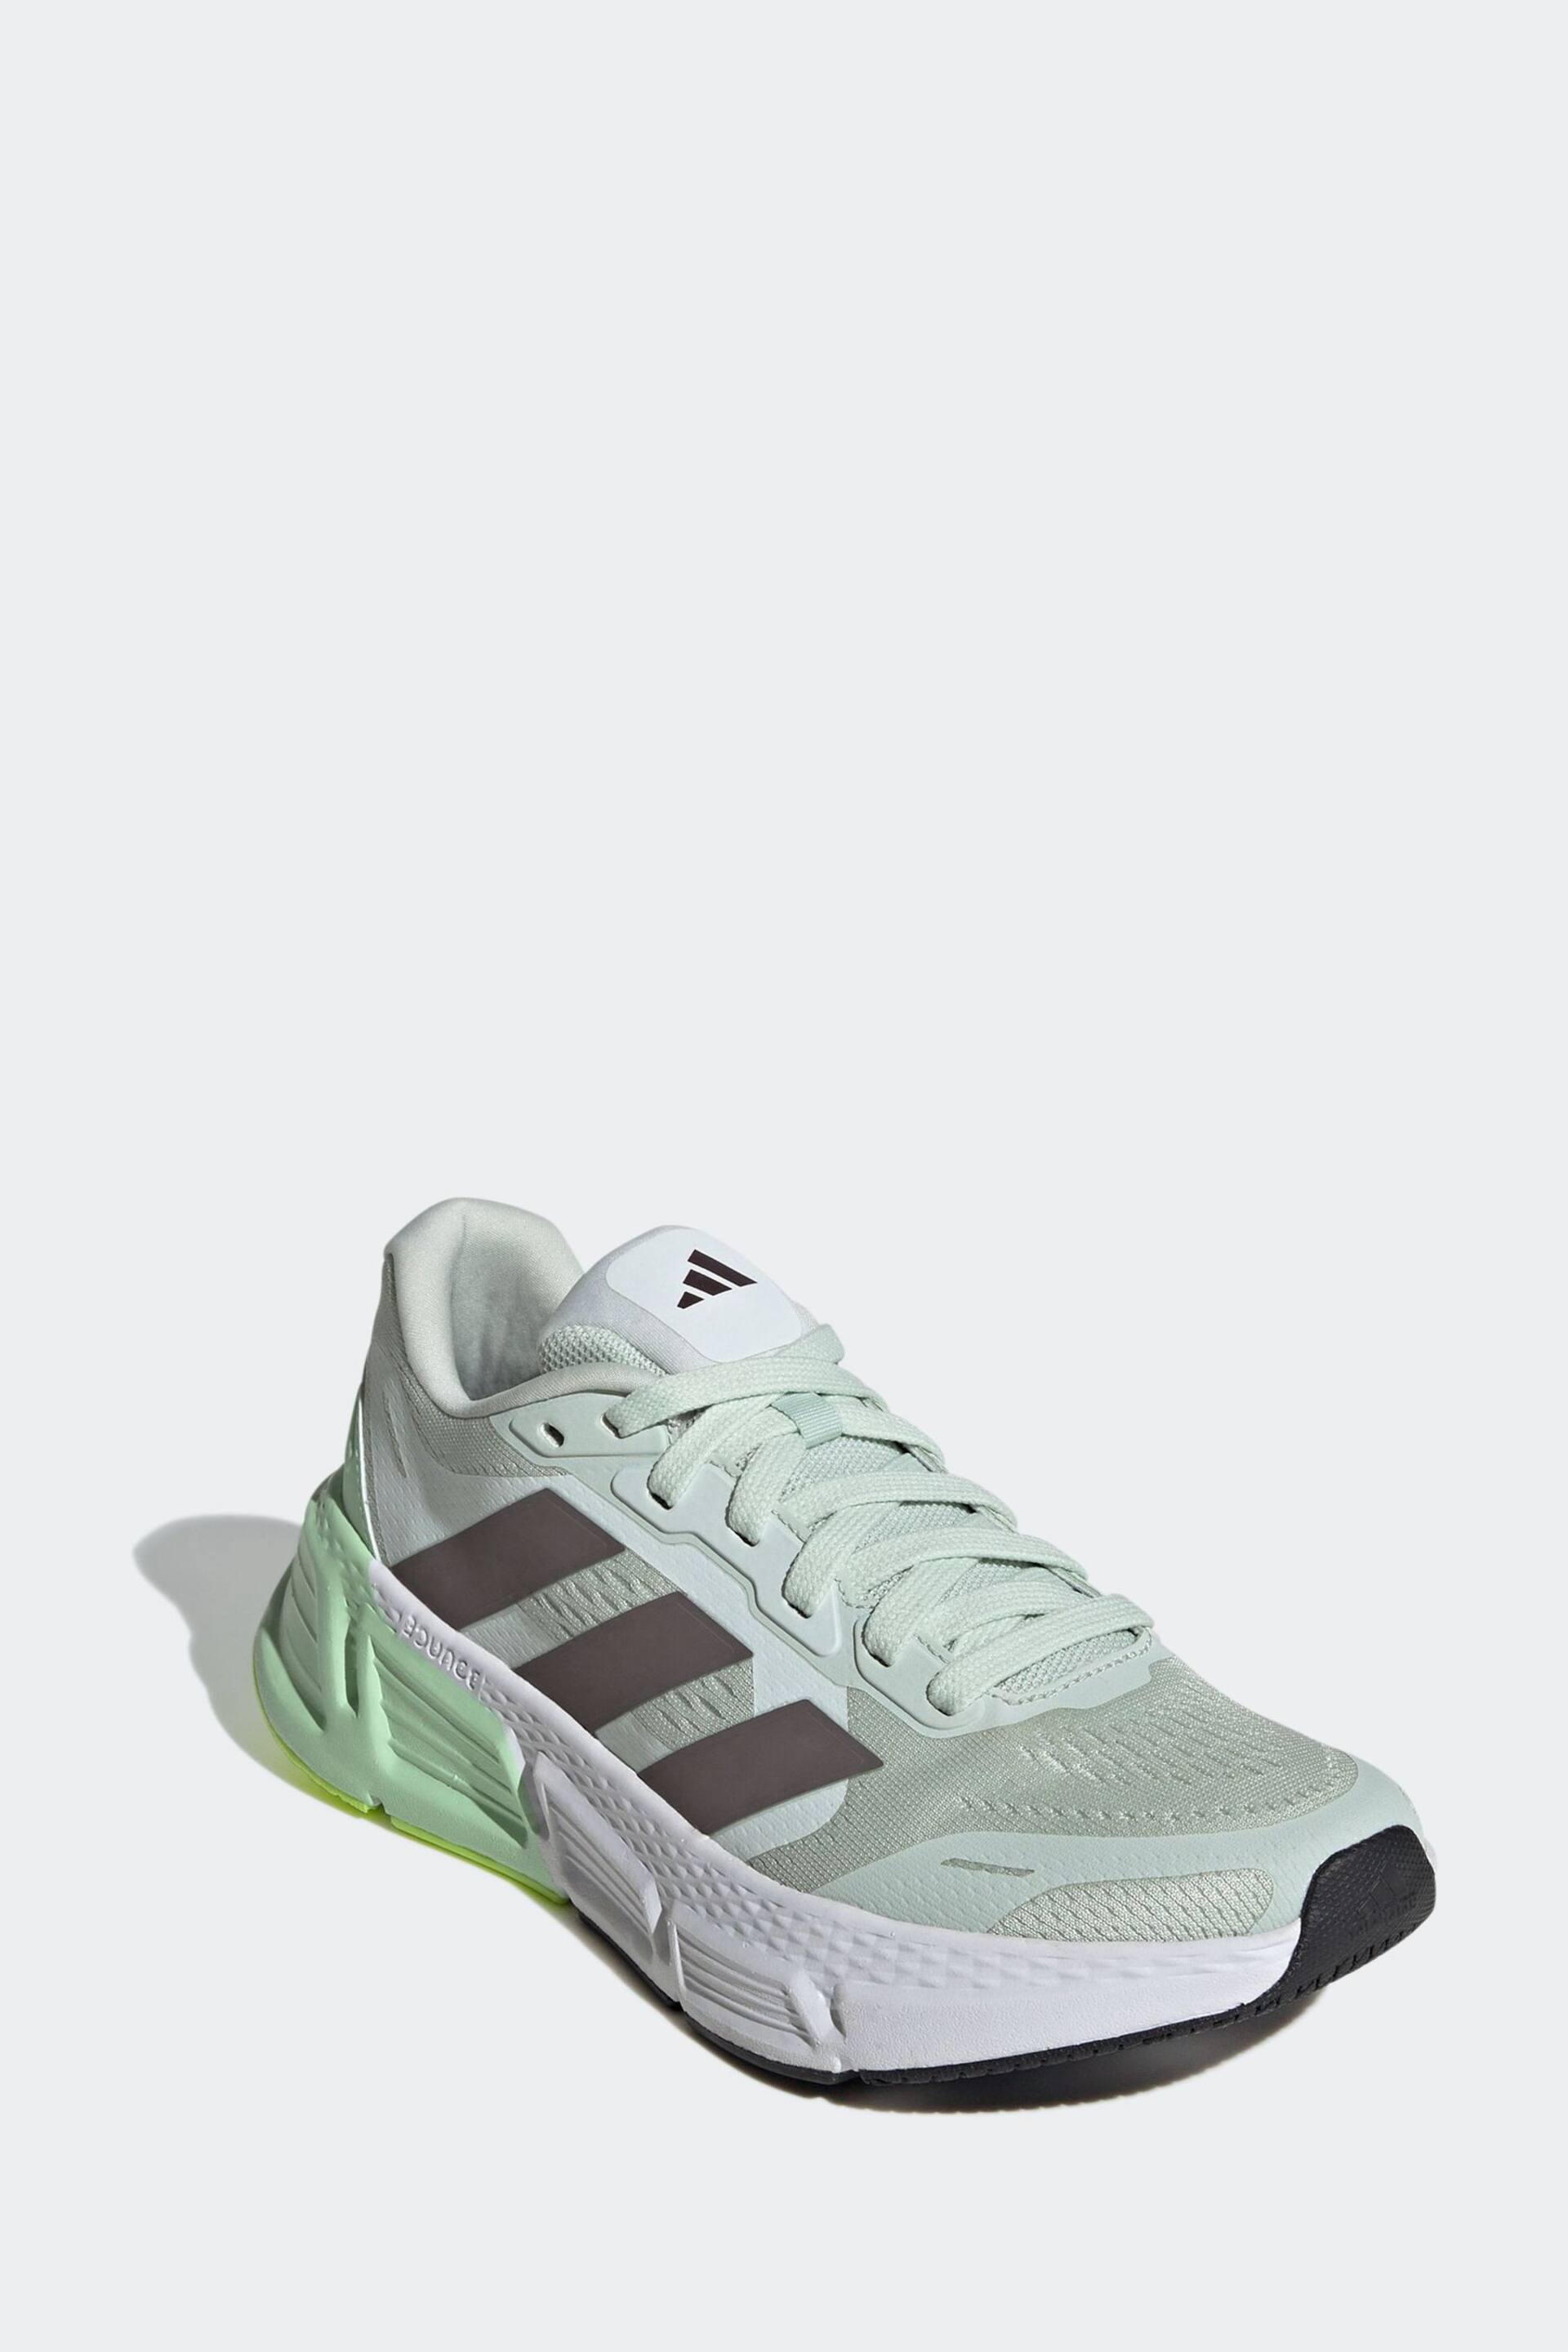 adidas Green Questar Trainers - Image 3 of 9